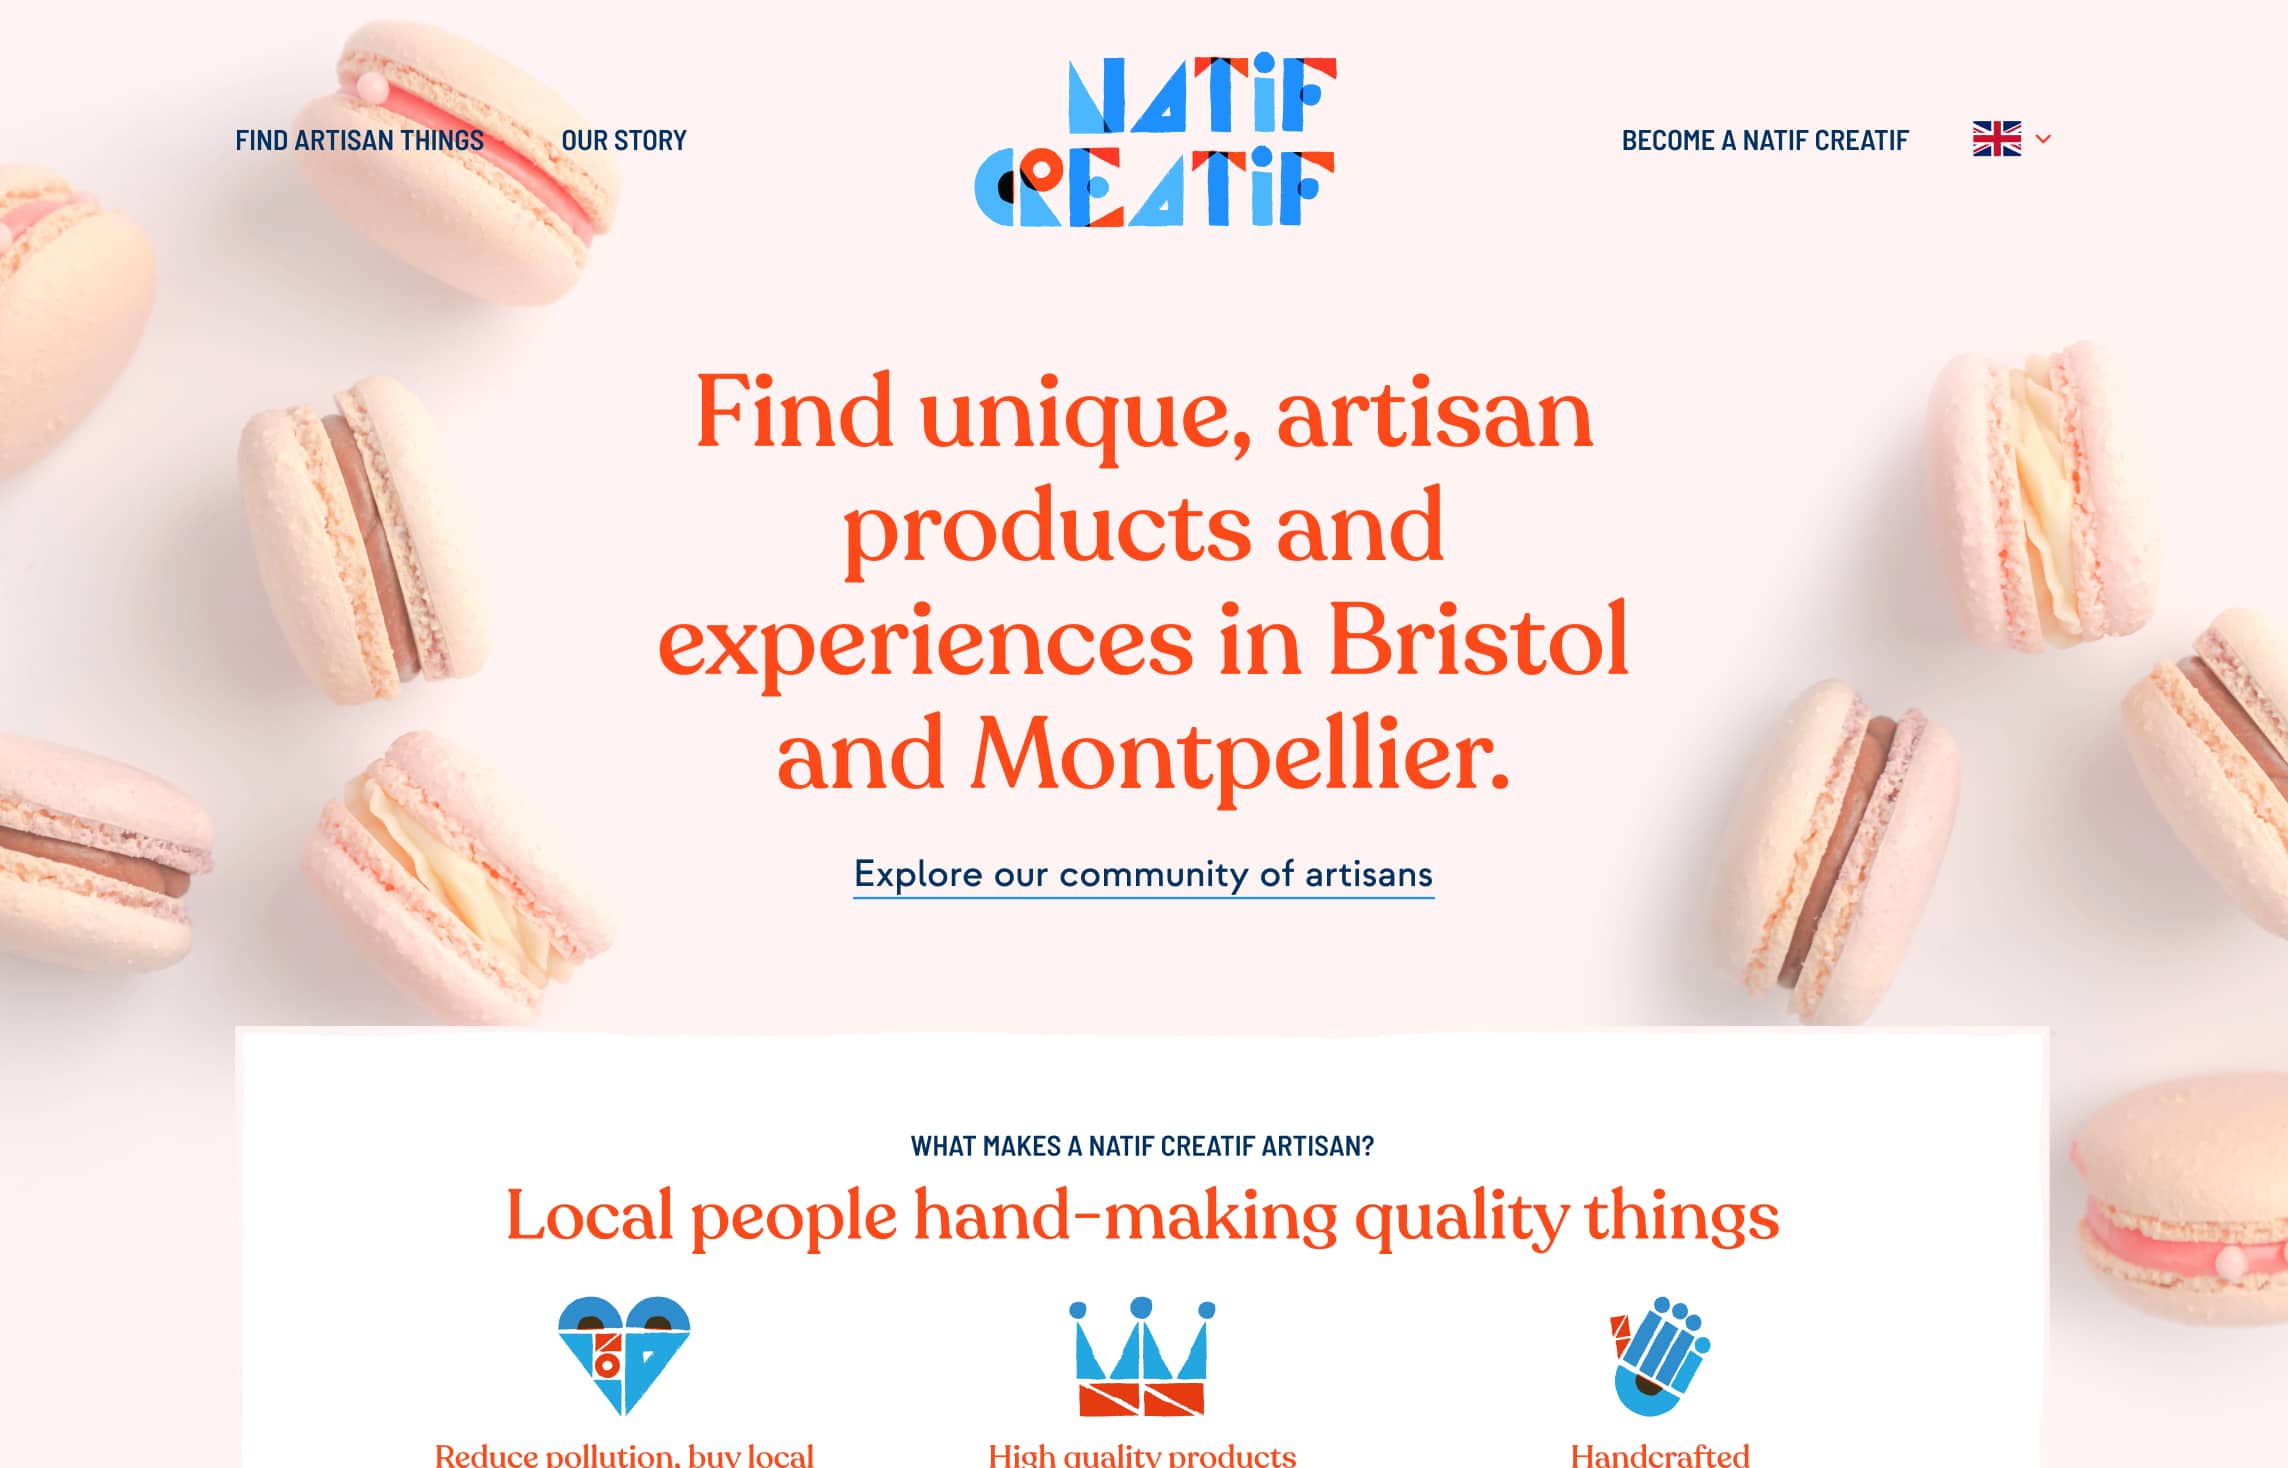 The Natif Creatif homepage running on a big screen. There are some macarons scattered around, and big text in the middle at the top saying 'Find unique, artisan products and experiences across Bristol and Montpellier'. Underneath that, there's a section explaining how NC works.